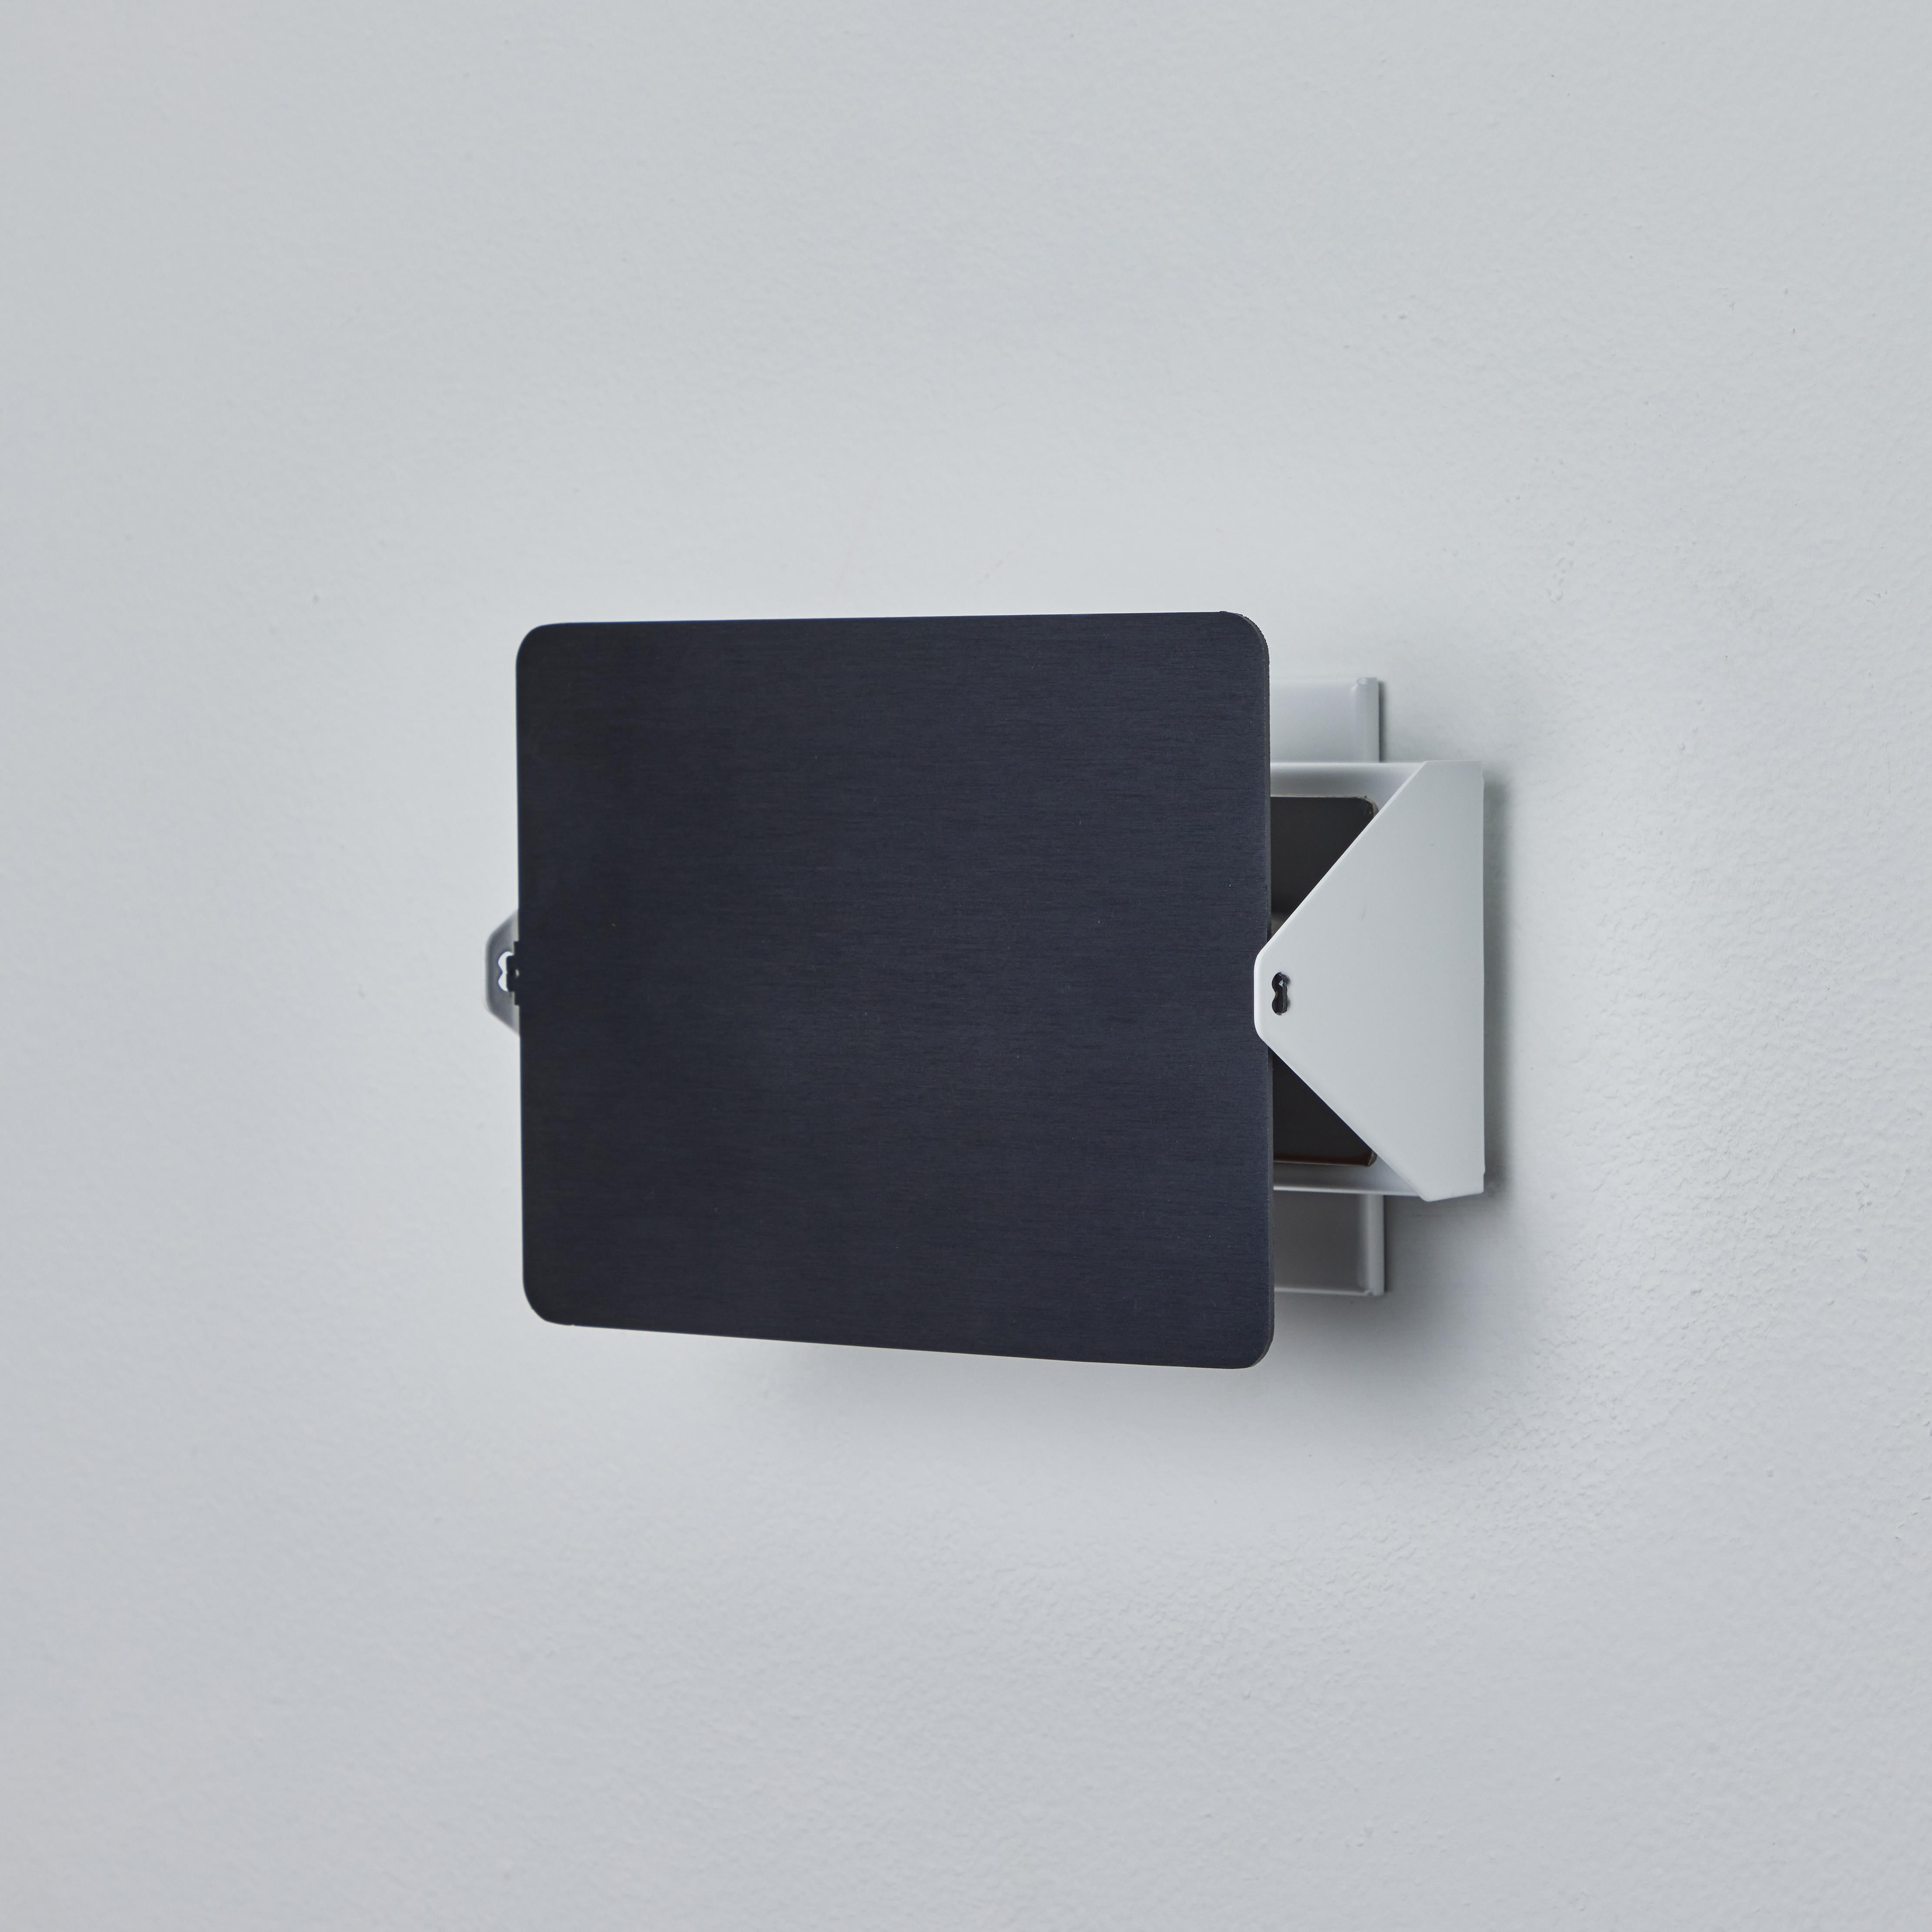 Charlotte Perriand 'Applique À Volet Pivotant' Wall Light in Black for Nemo For Sale 2